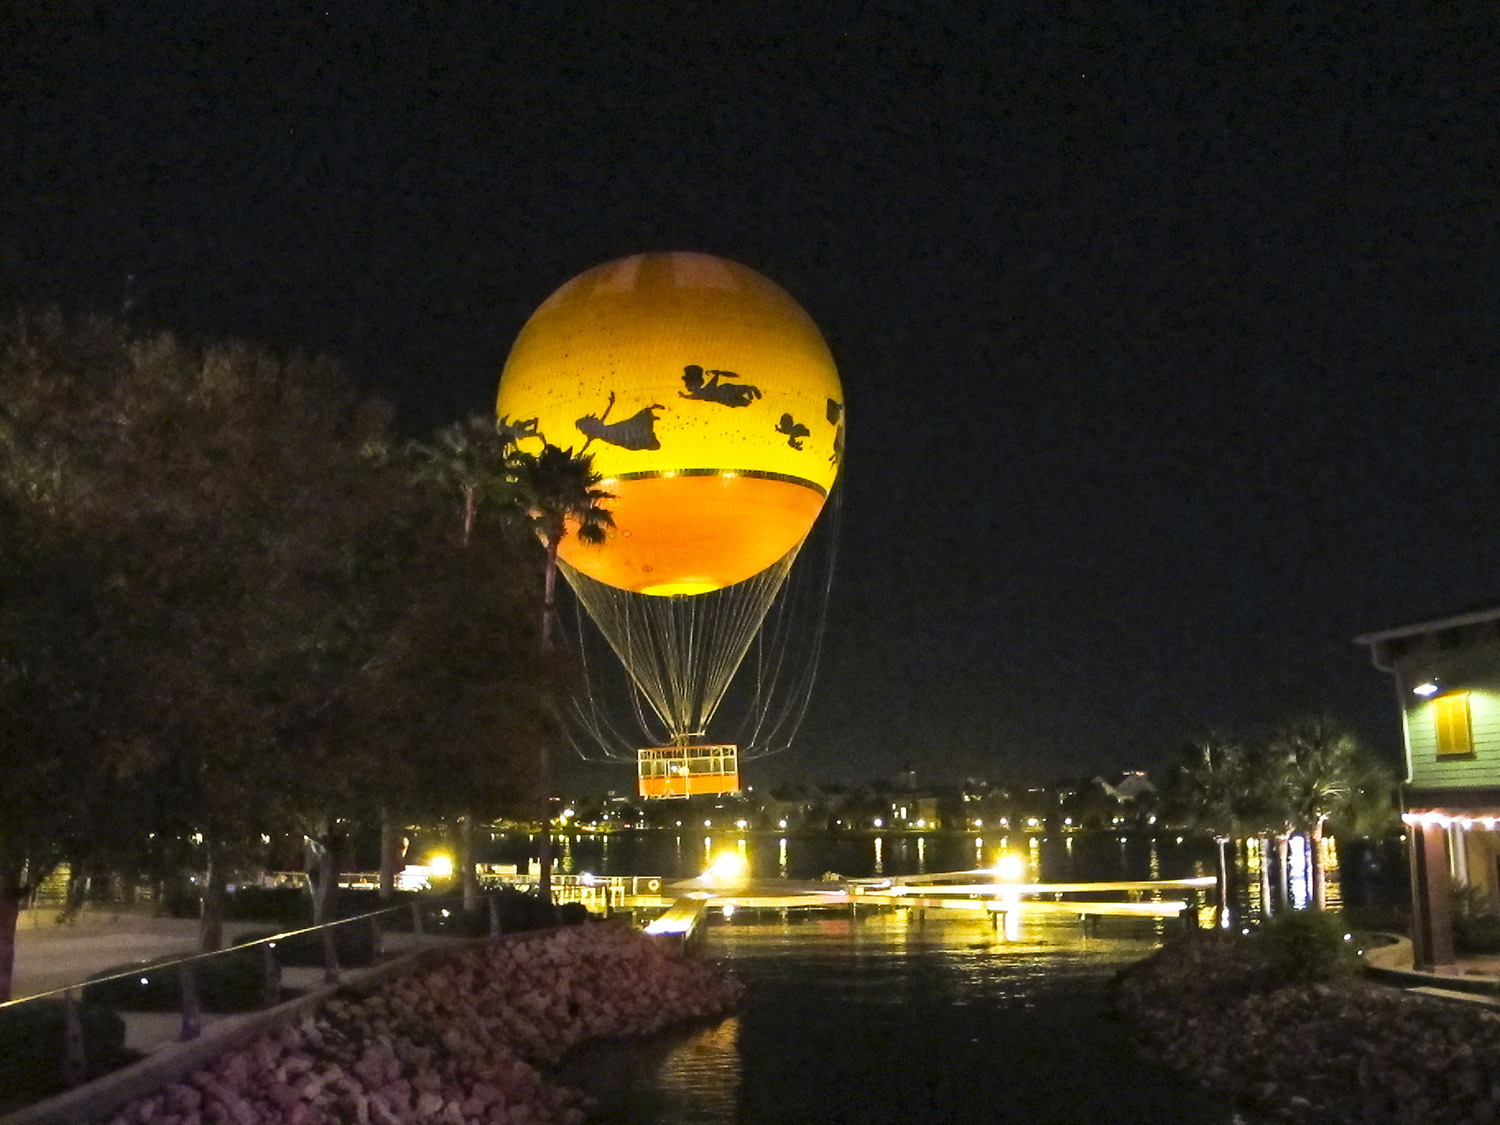 Downtown Disney - Characters in Flight